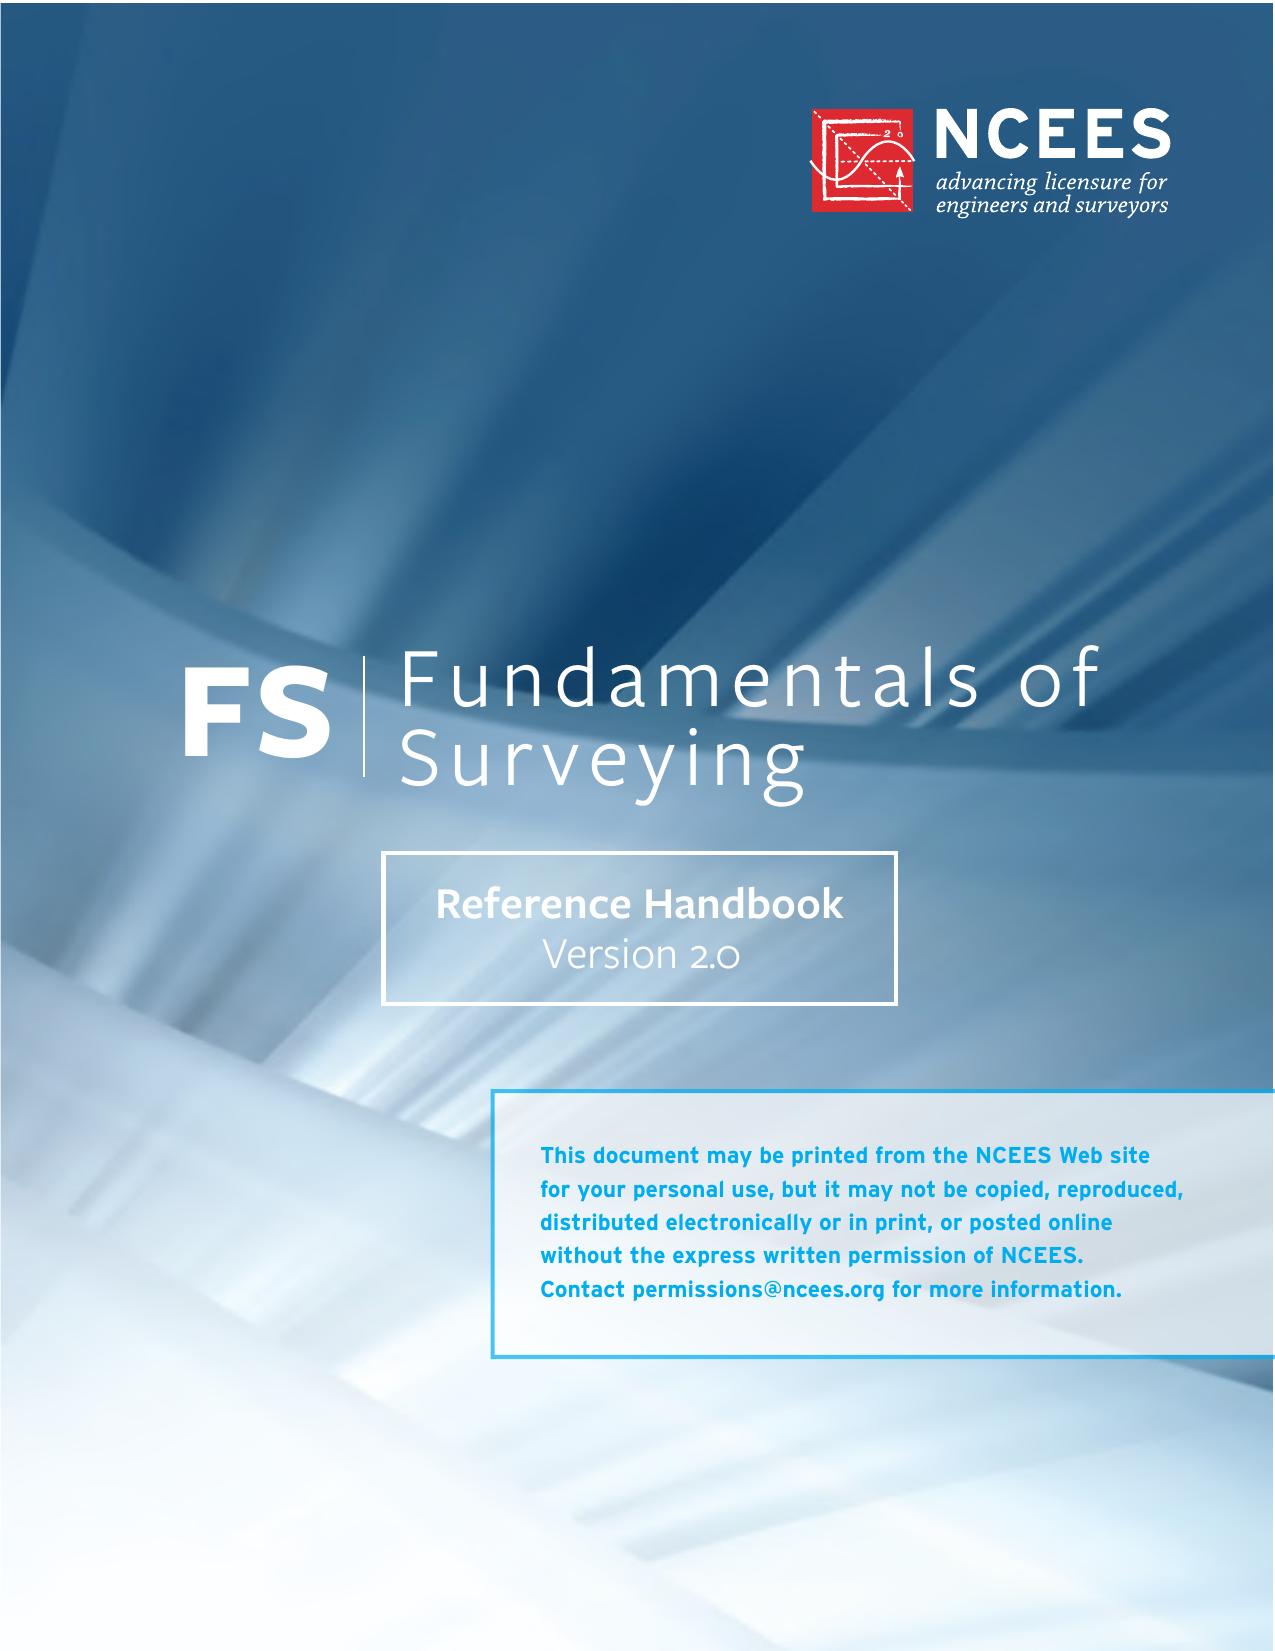 FS Fundamentals of Surveying Reference Handbook 2.0 National Council of Examiners for Engineering Surveying (NCEES) 2020